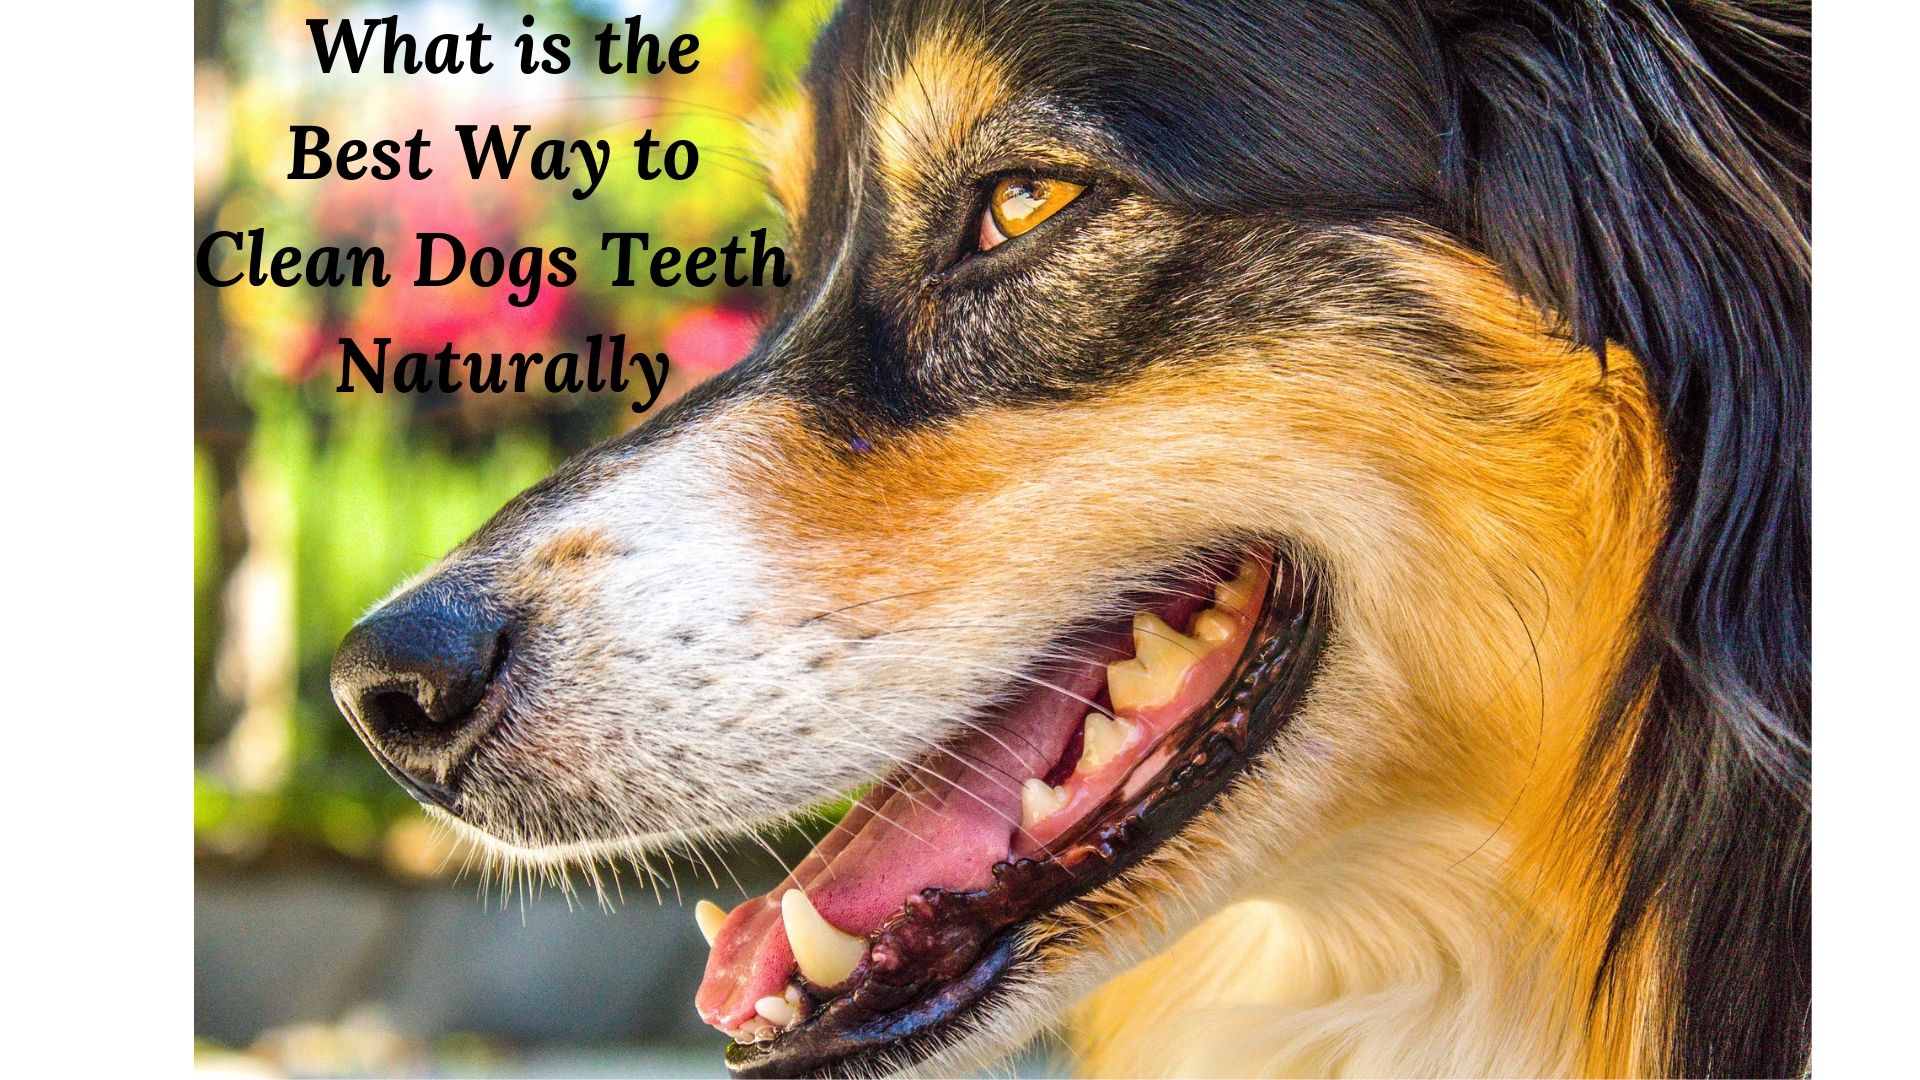 What id the best way to clean dogs teeth